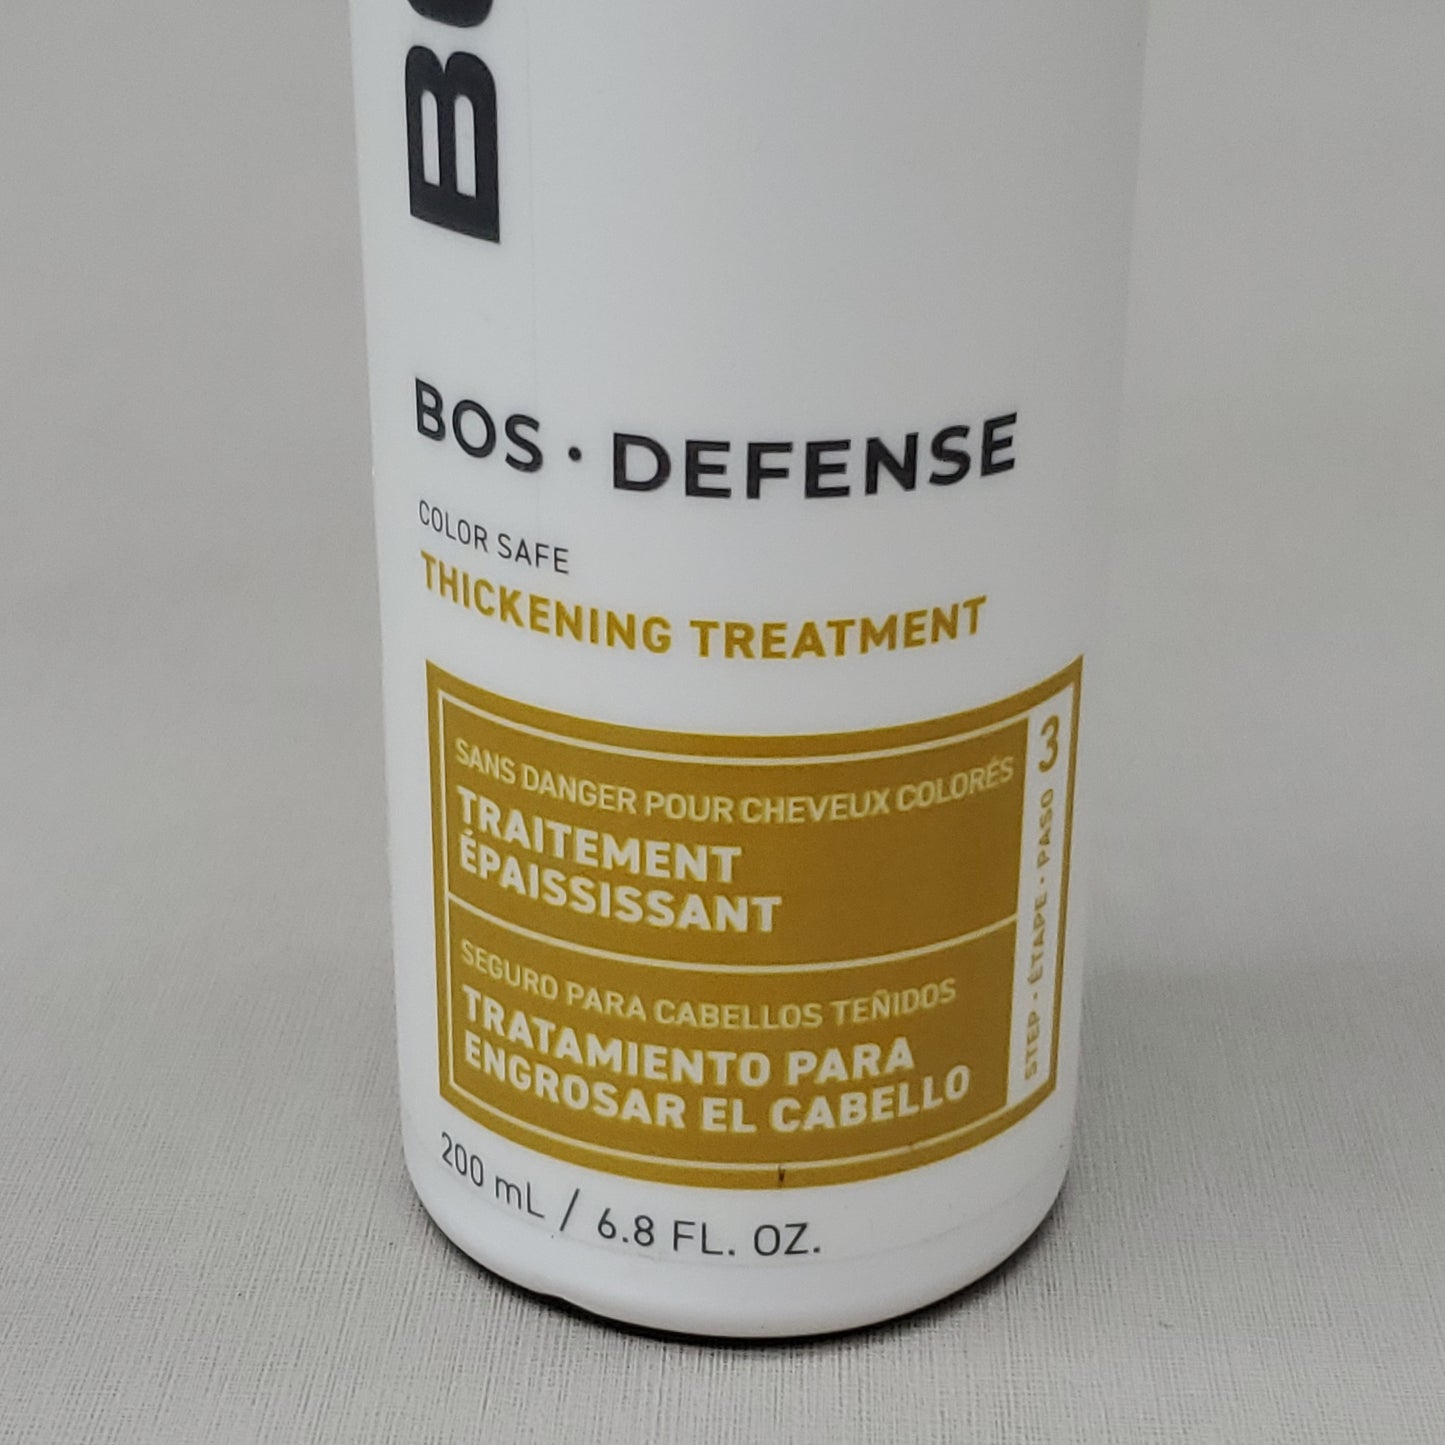 BOSLEY MD BOS Defense Color Safe Thickening Treatment Step 3 6.8 fl oz (New)